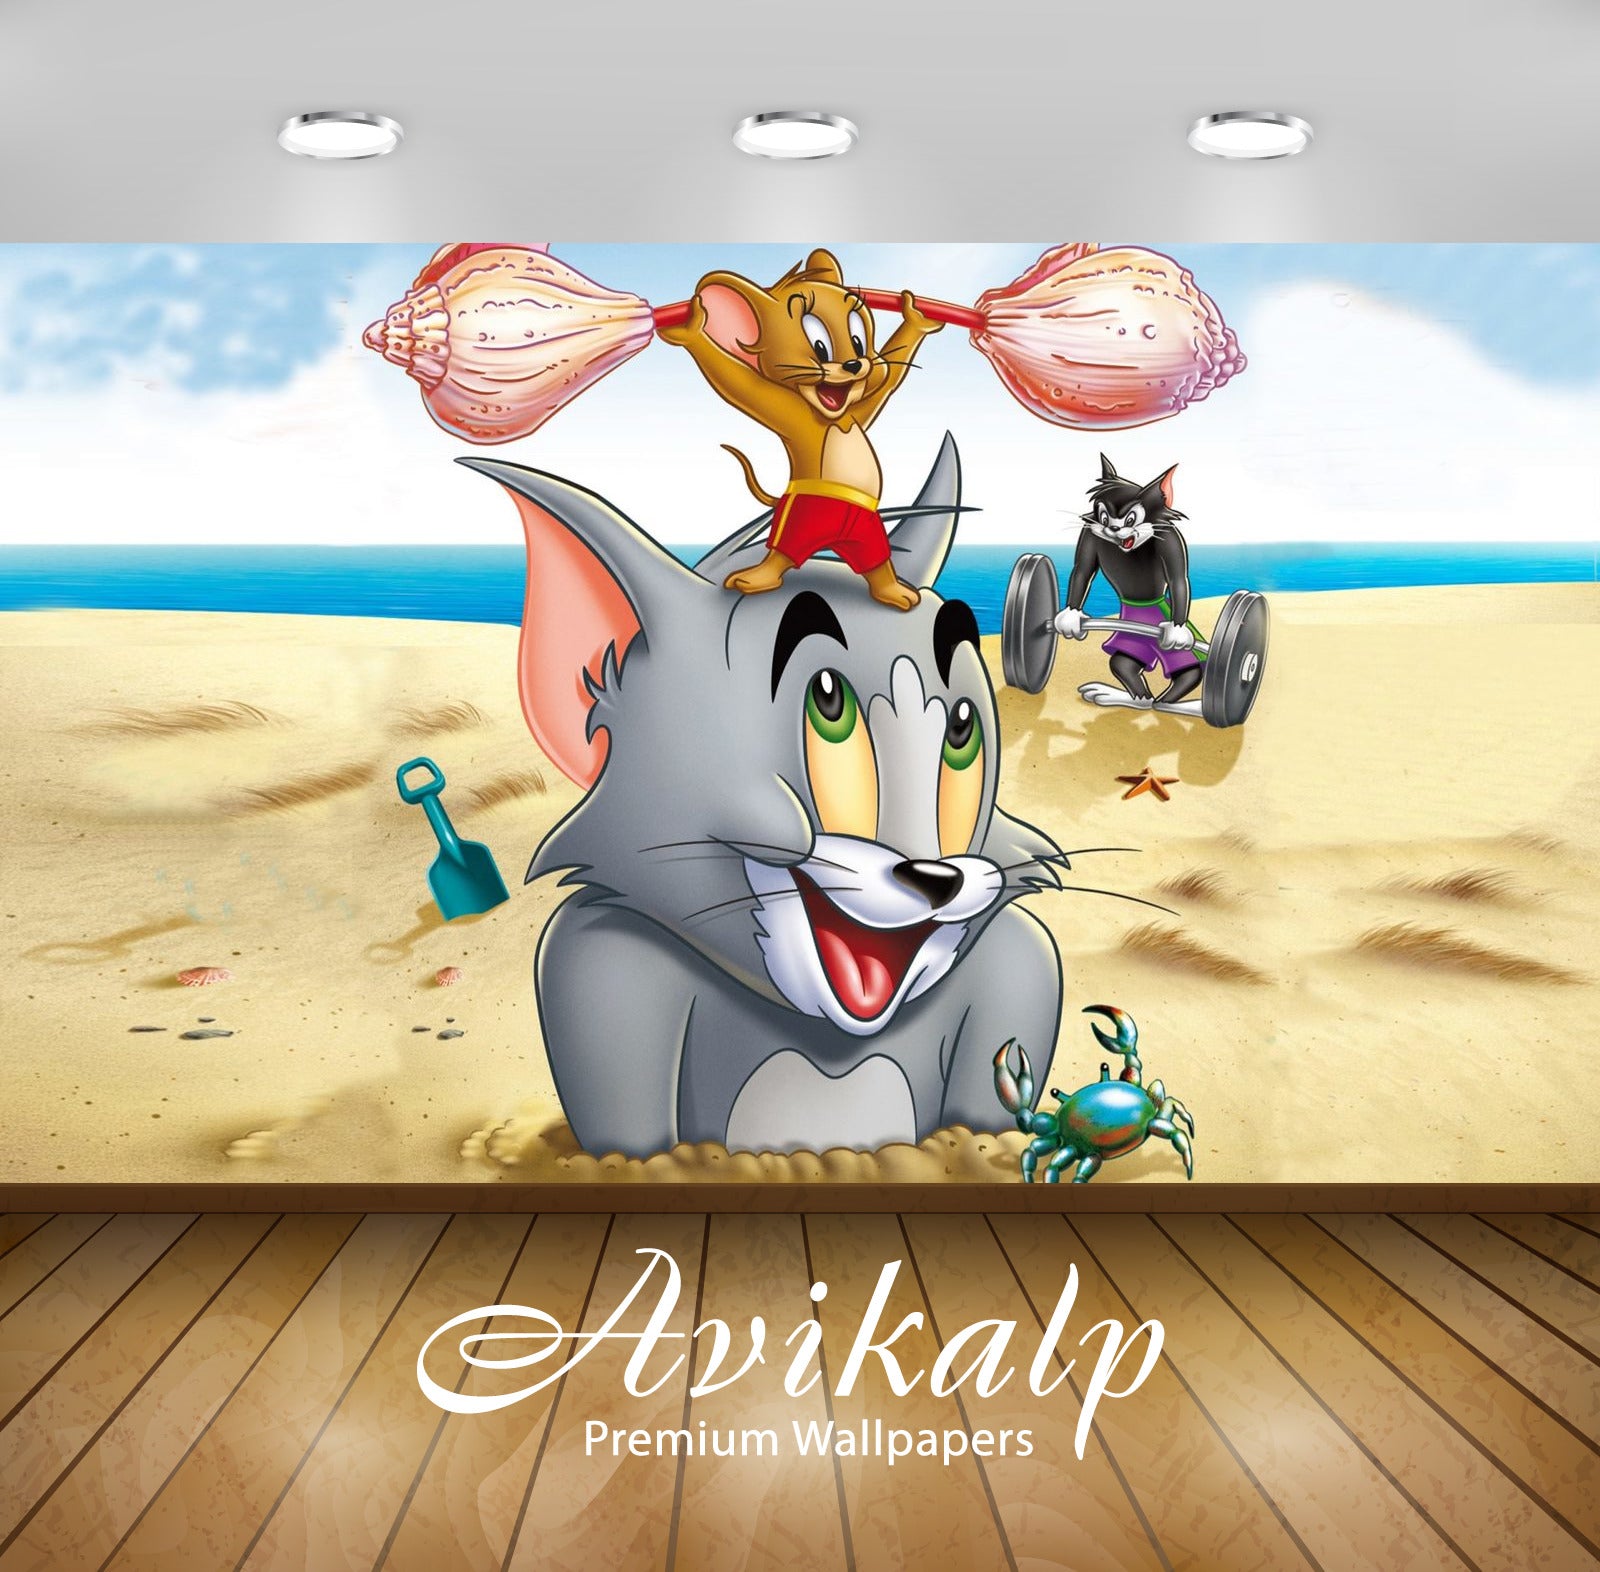 Avikalp Exclusive Awi2285 Tom and Jerry Tough And Tumble Full HD Wallpapers for Living room, Hall, K